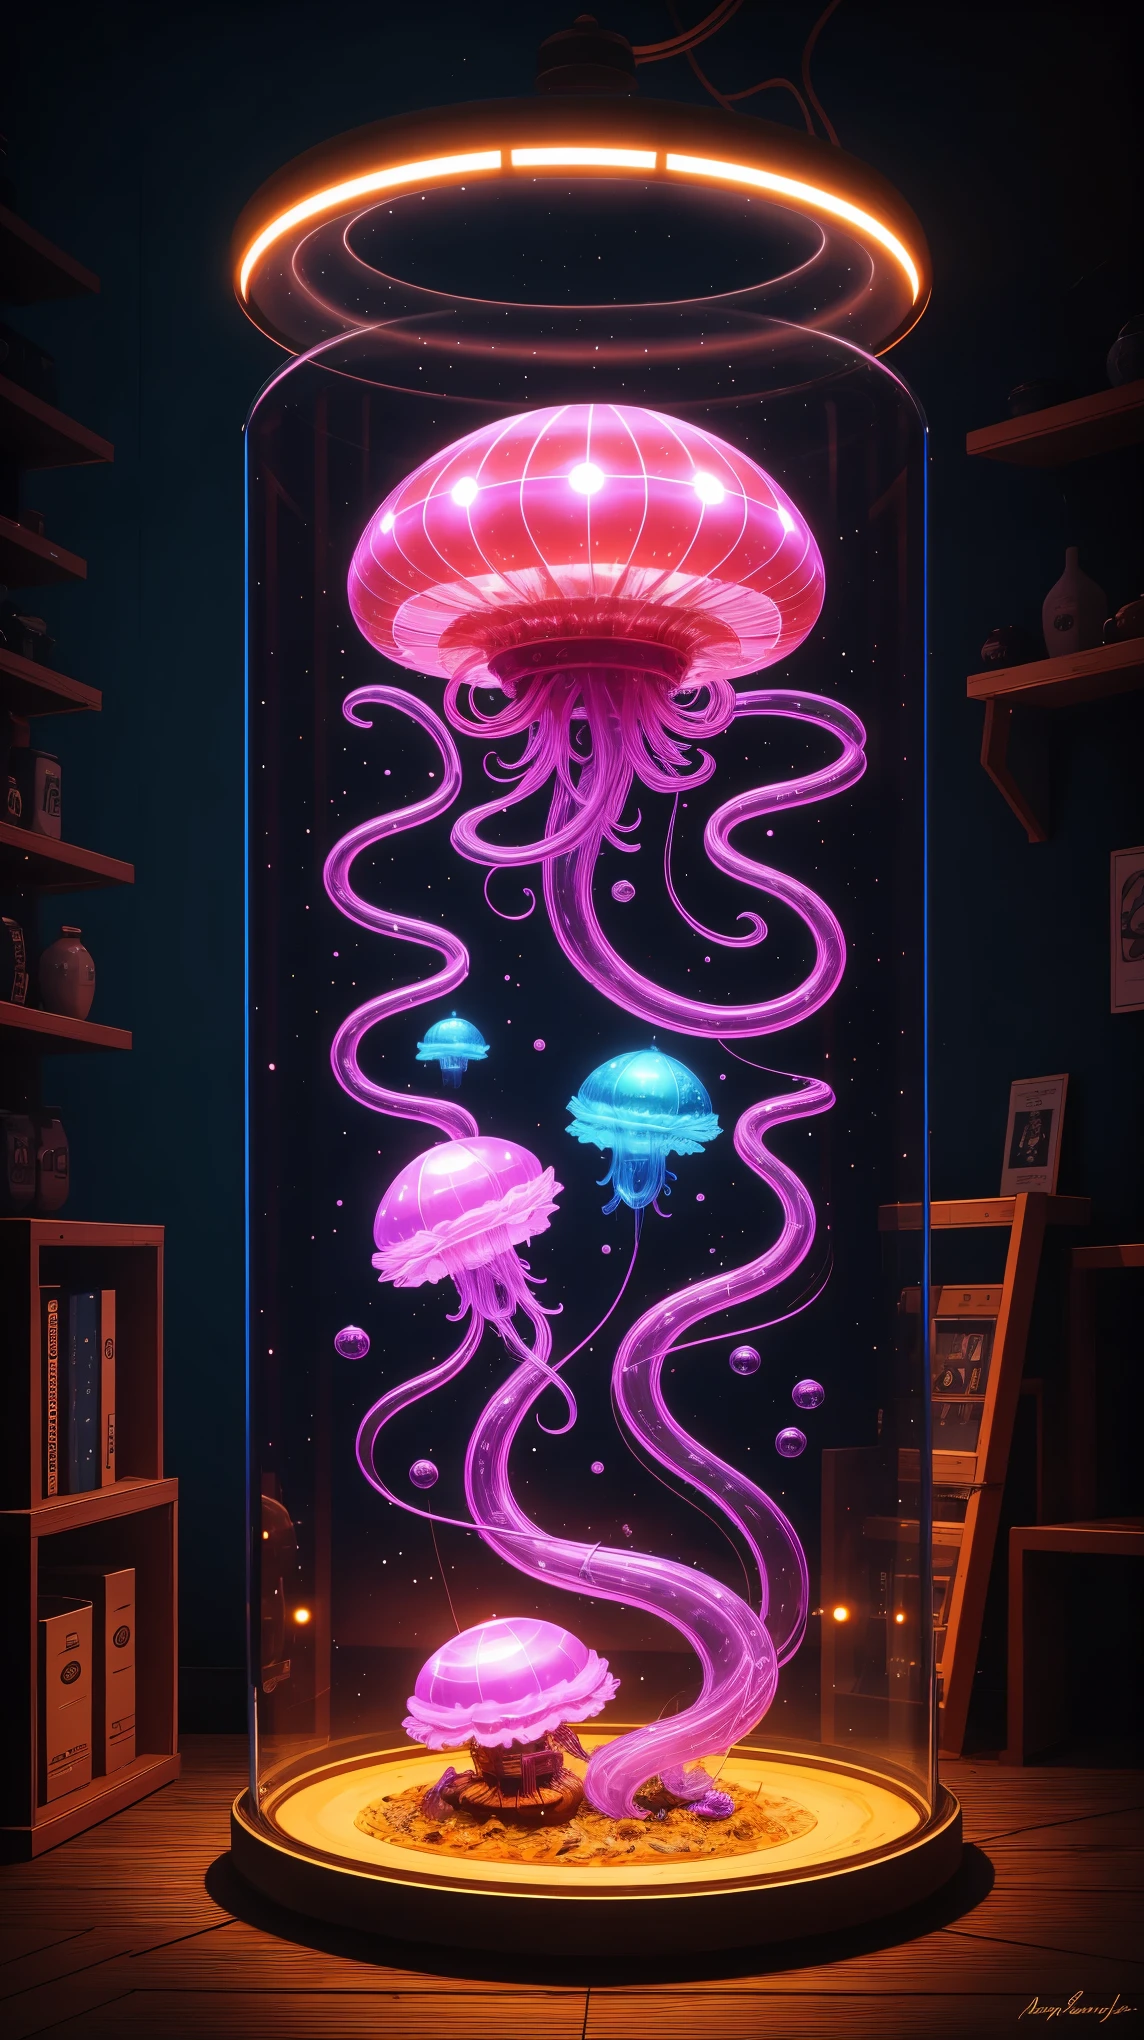 COMG3O,best quality,ultra-detailed,realistic,jellyfish,swimming underwater,glowing bioluminescence,fluid movement,transparent body,graceful tentacles,ethereal beauty,soft and gentle colors,subtle lighting,marine life exhibit,mesmerizing sight,abstract art